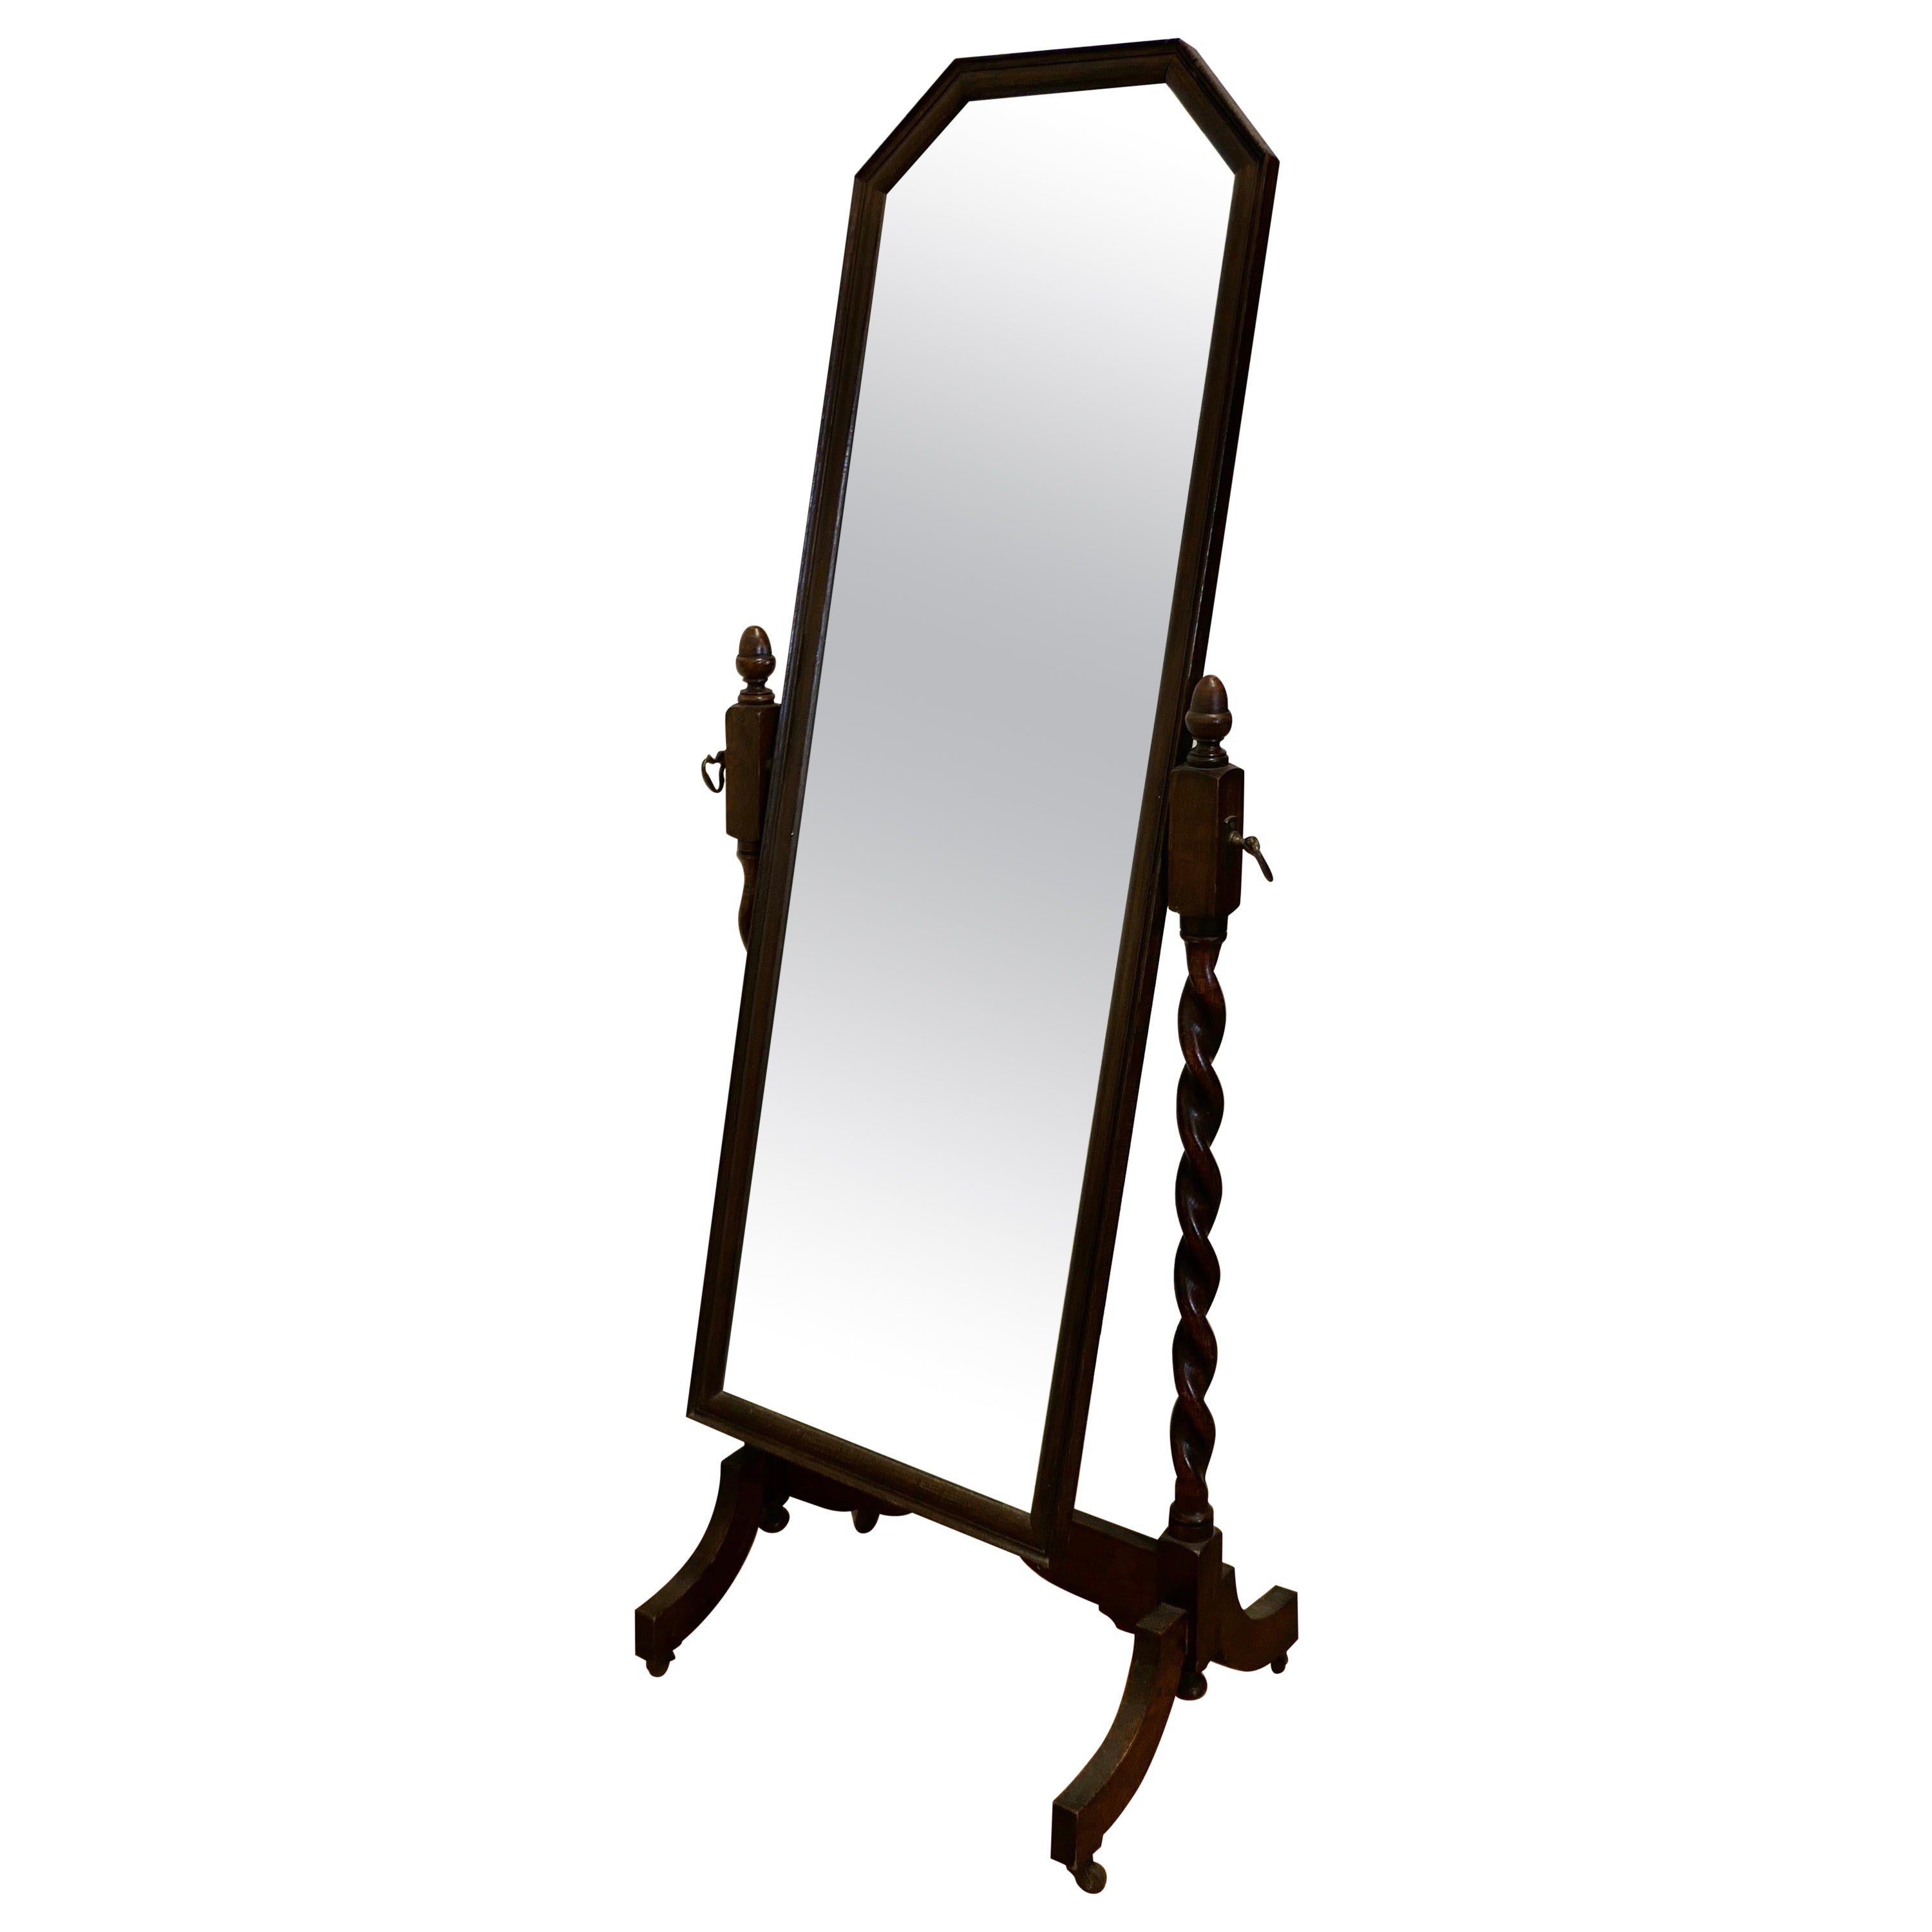 19th Century Floor Mirrors and Full-Length Mirrors